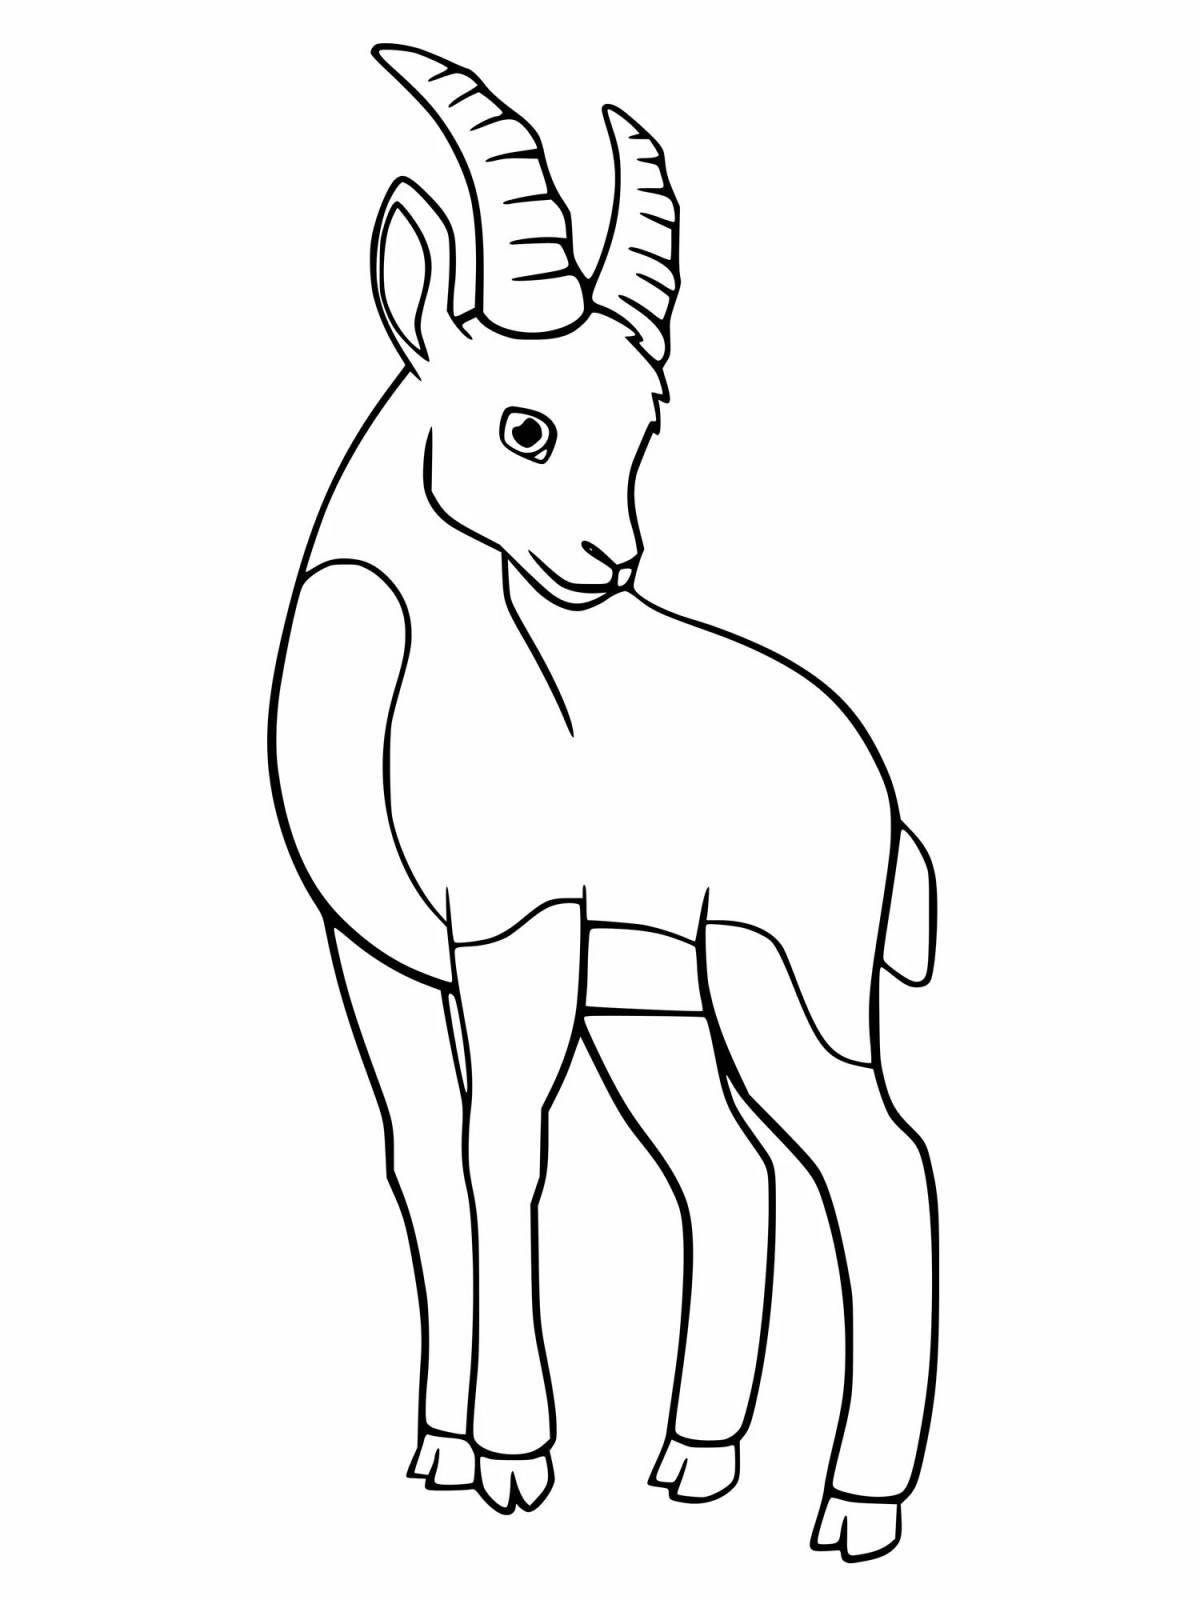 Exquisite mountain goat coloring